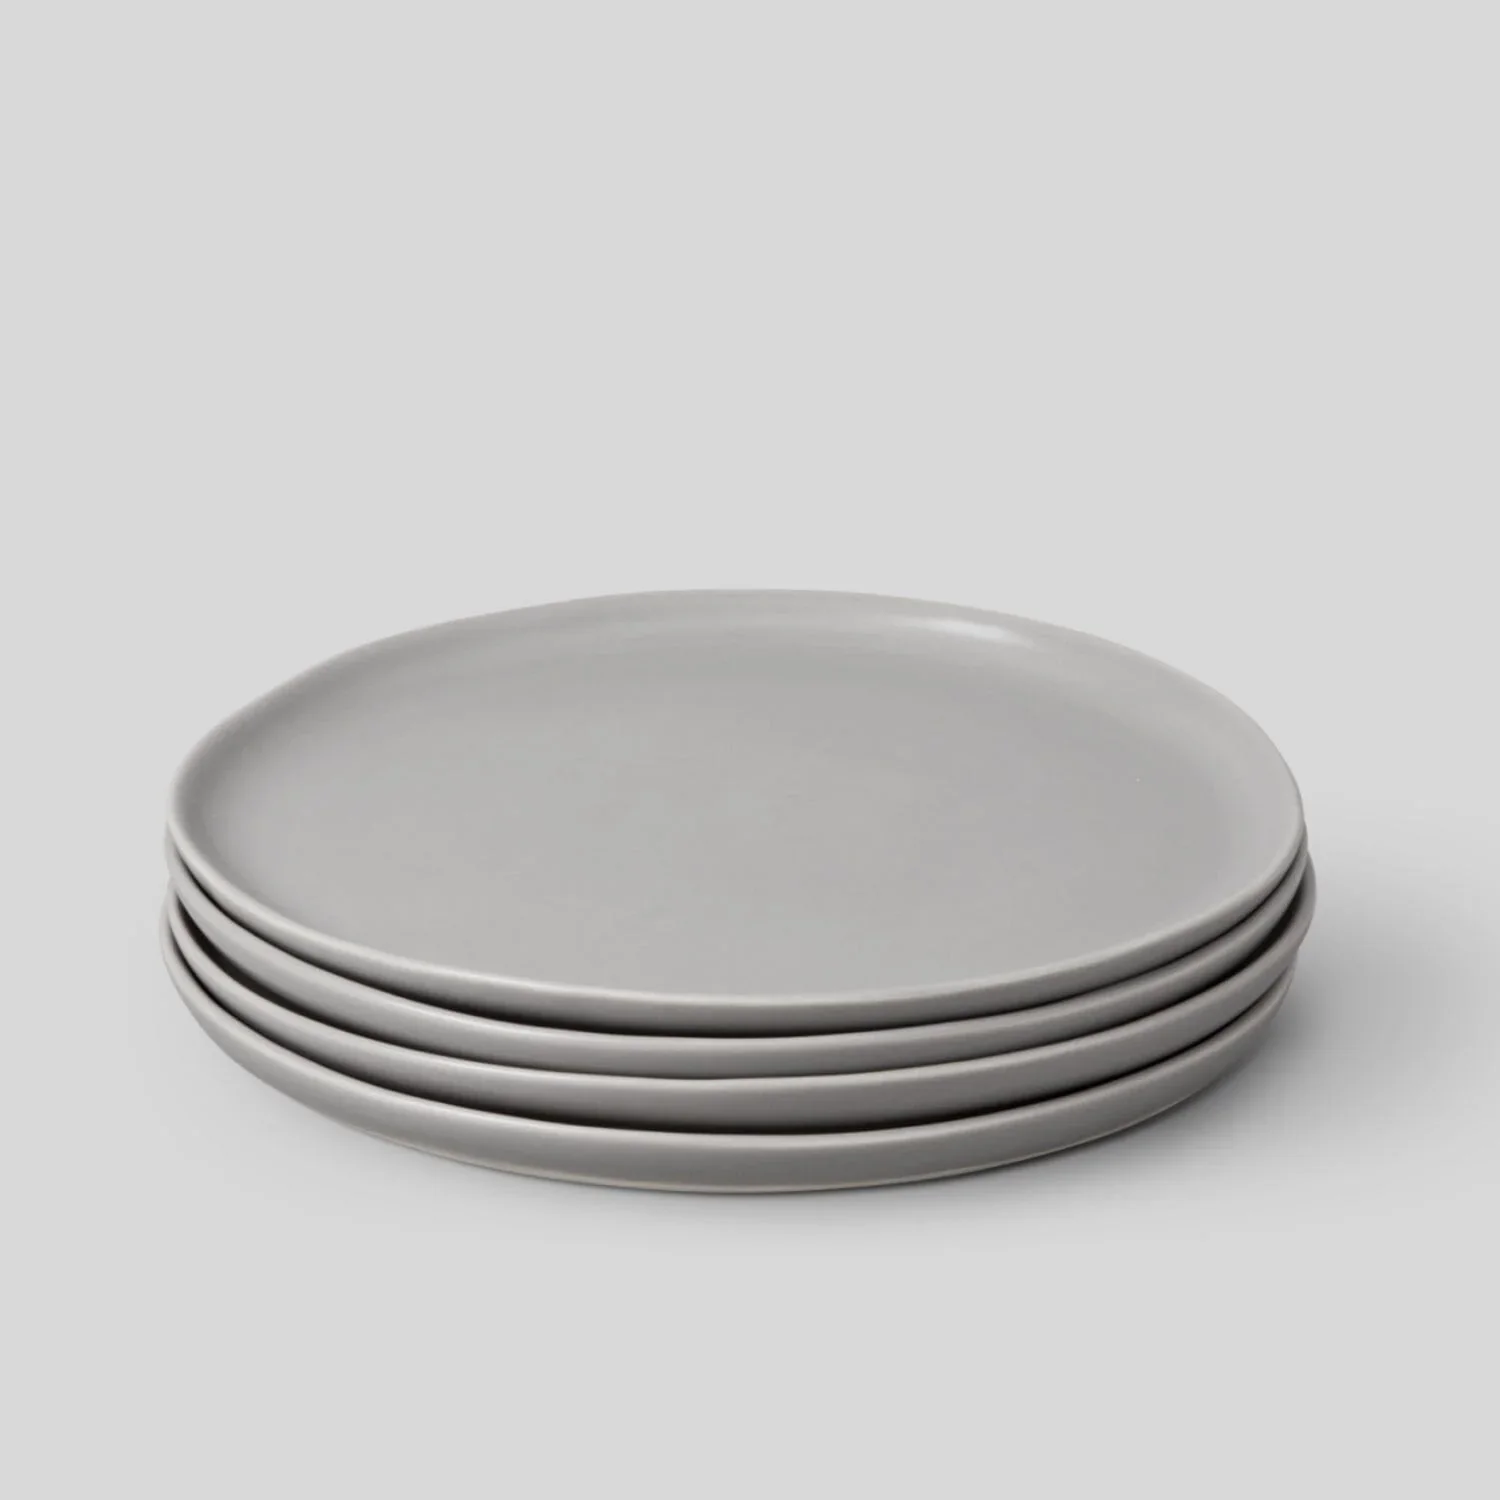 Image of The Dinner Plates